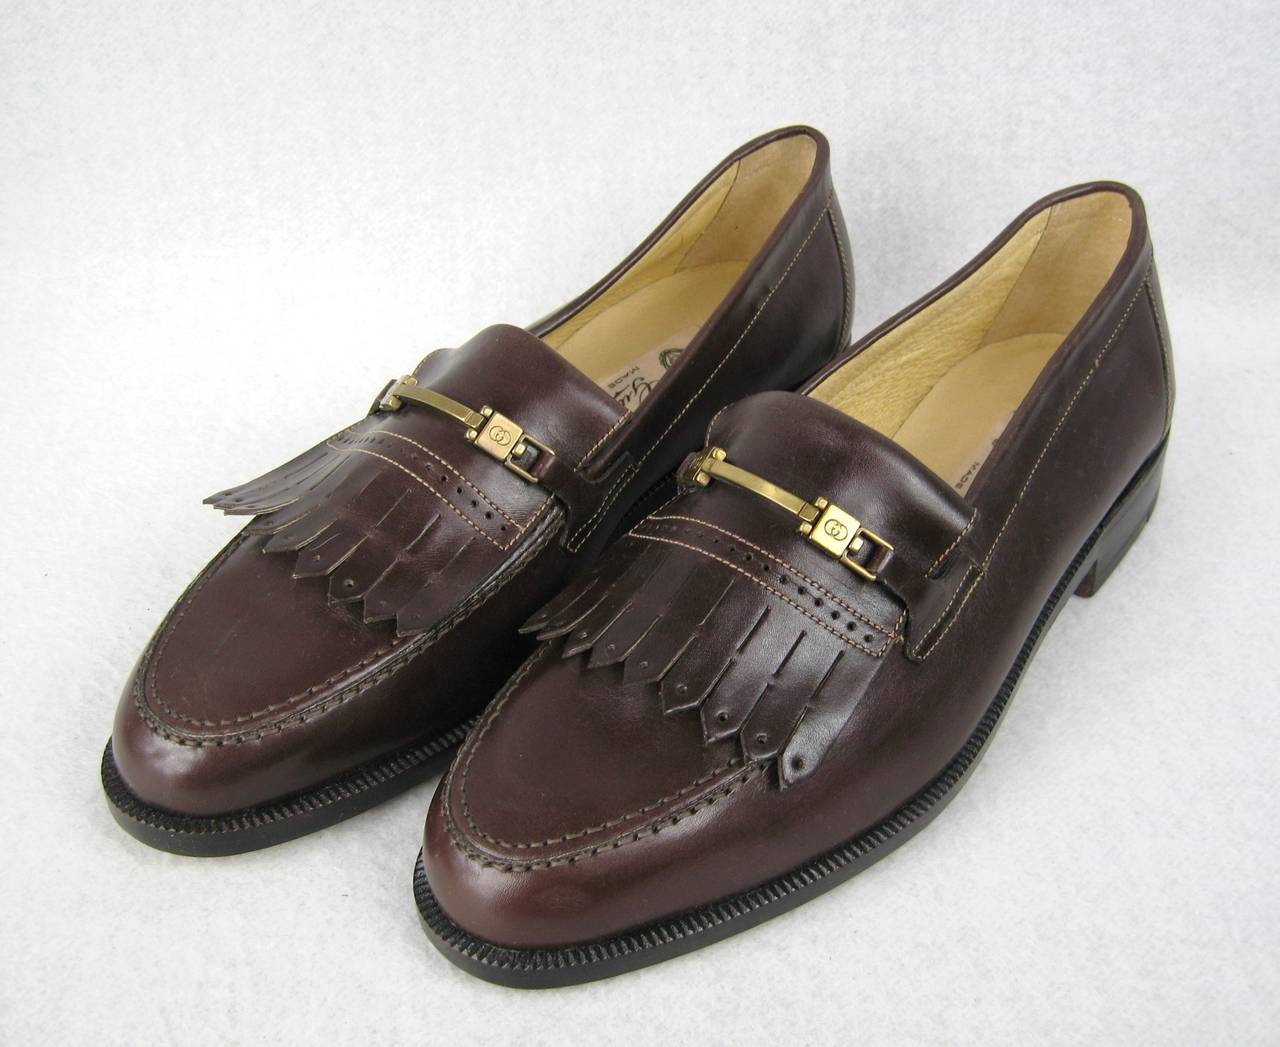 Black 1970s Brown Gucci Fringed Loafer Shoes New Never Worn